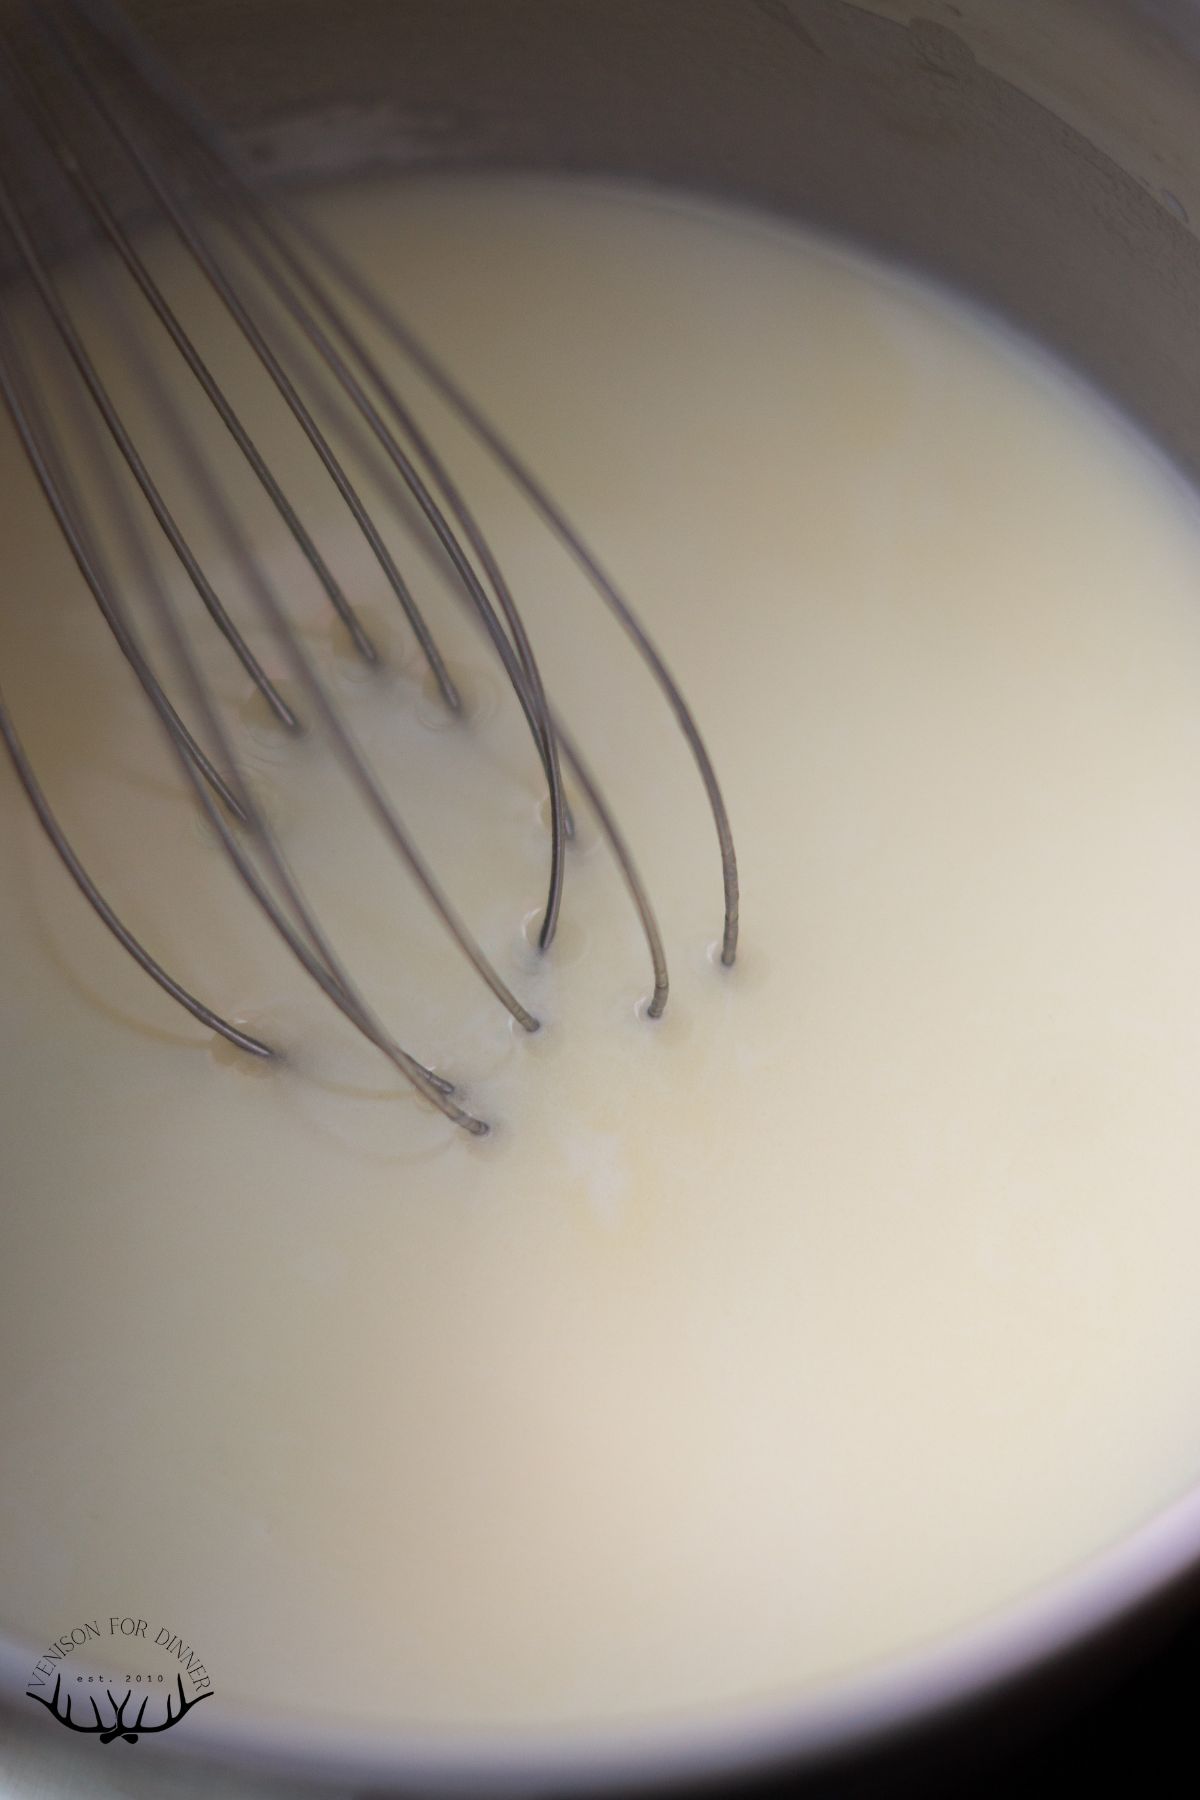 Whisk in a bowl of milk.